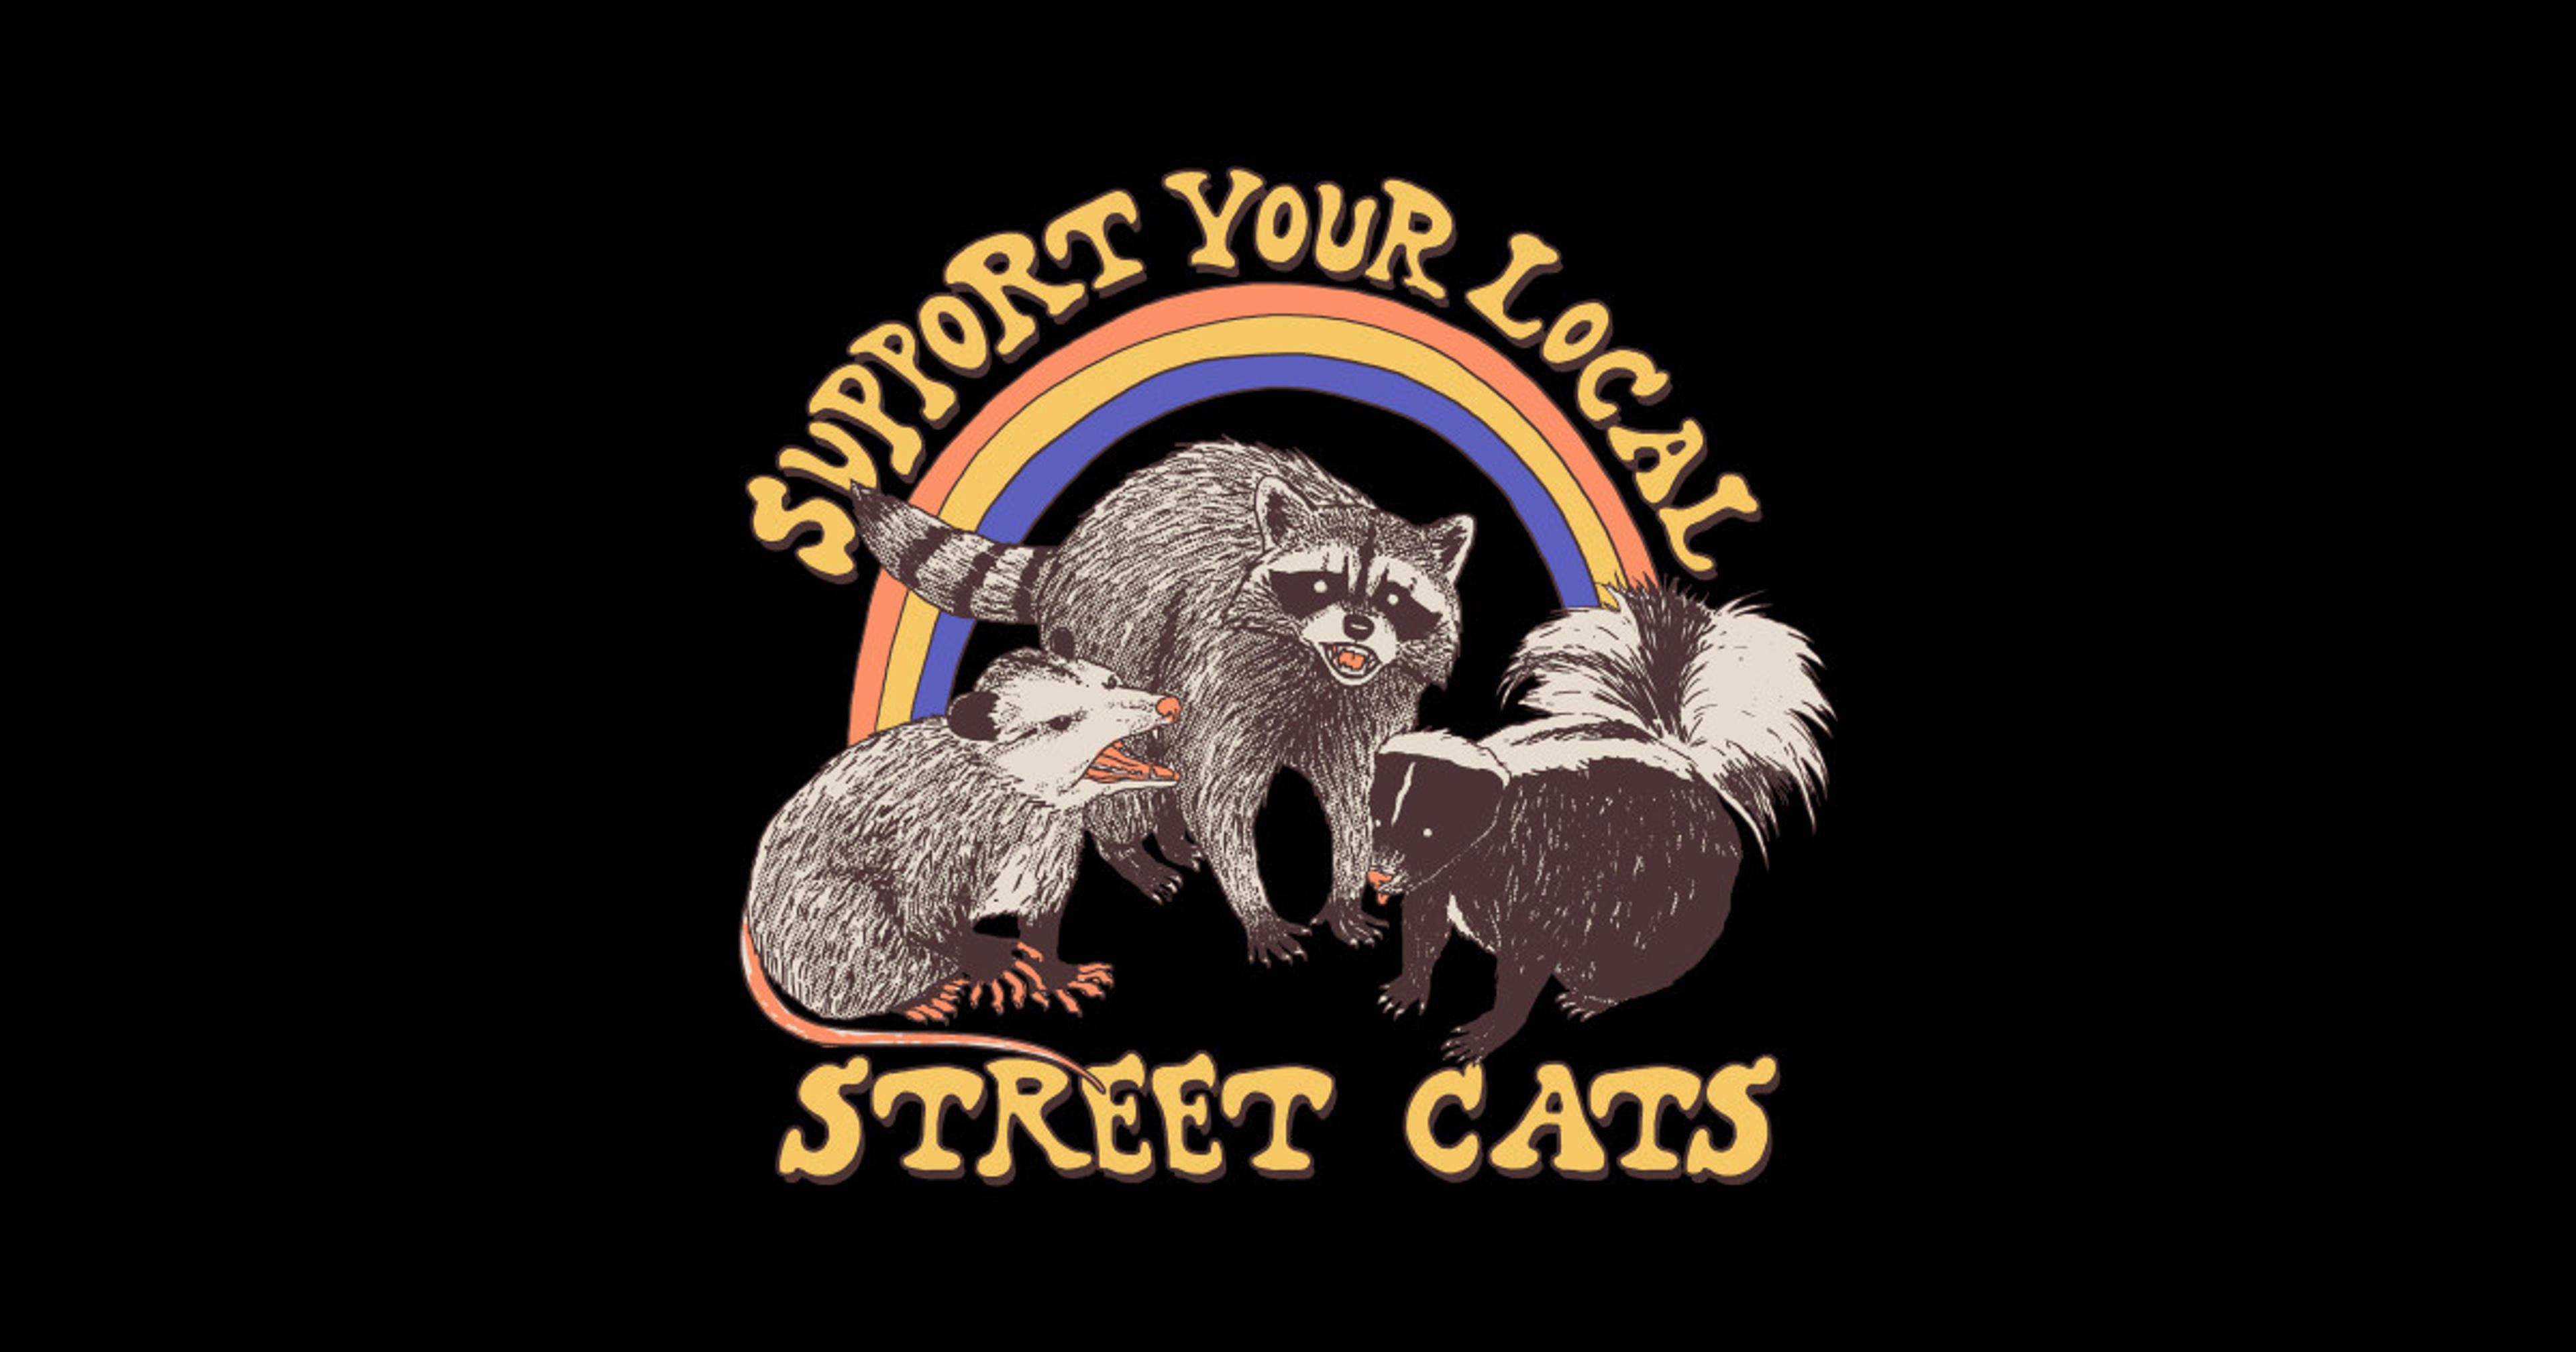 Street Cats by wytrab8